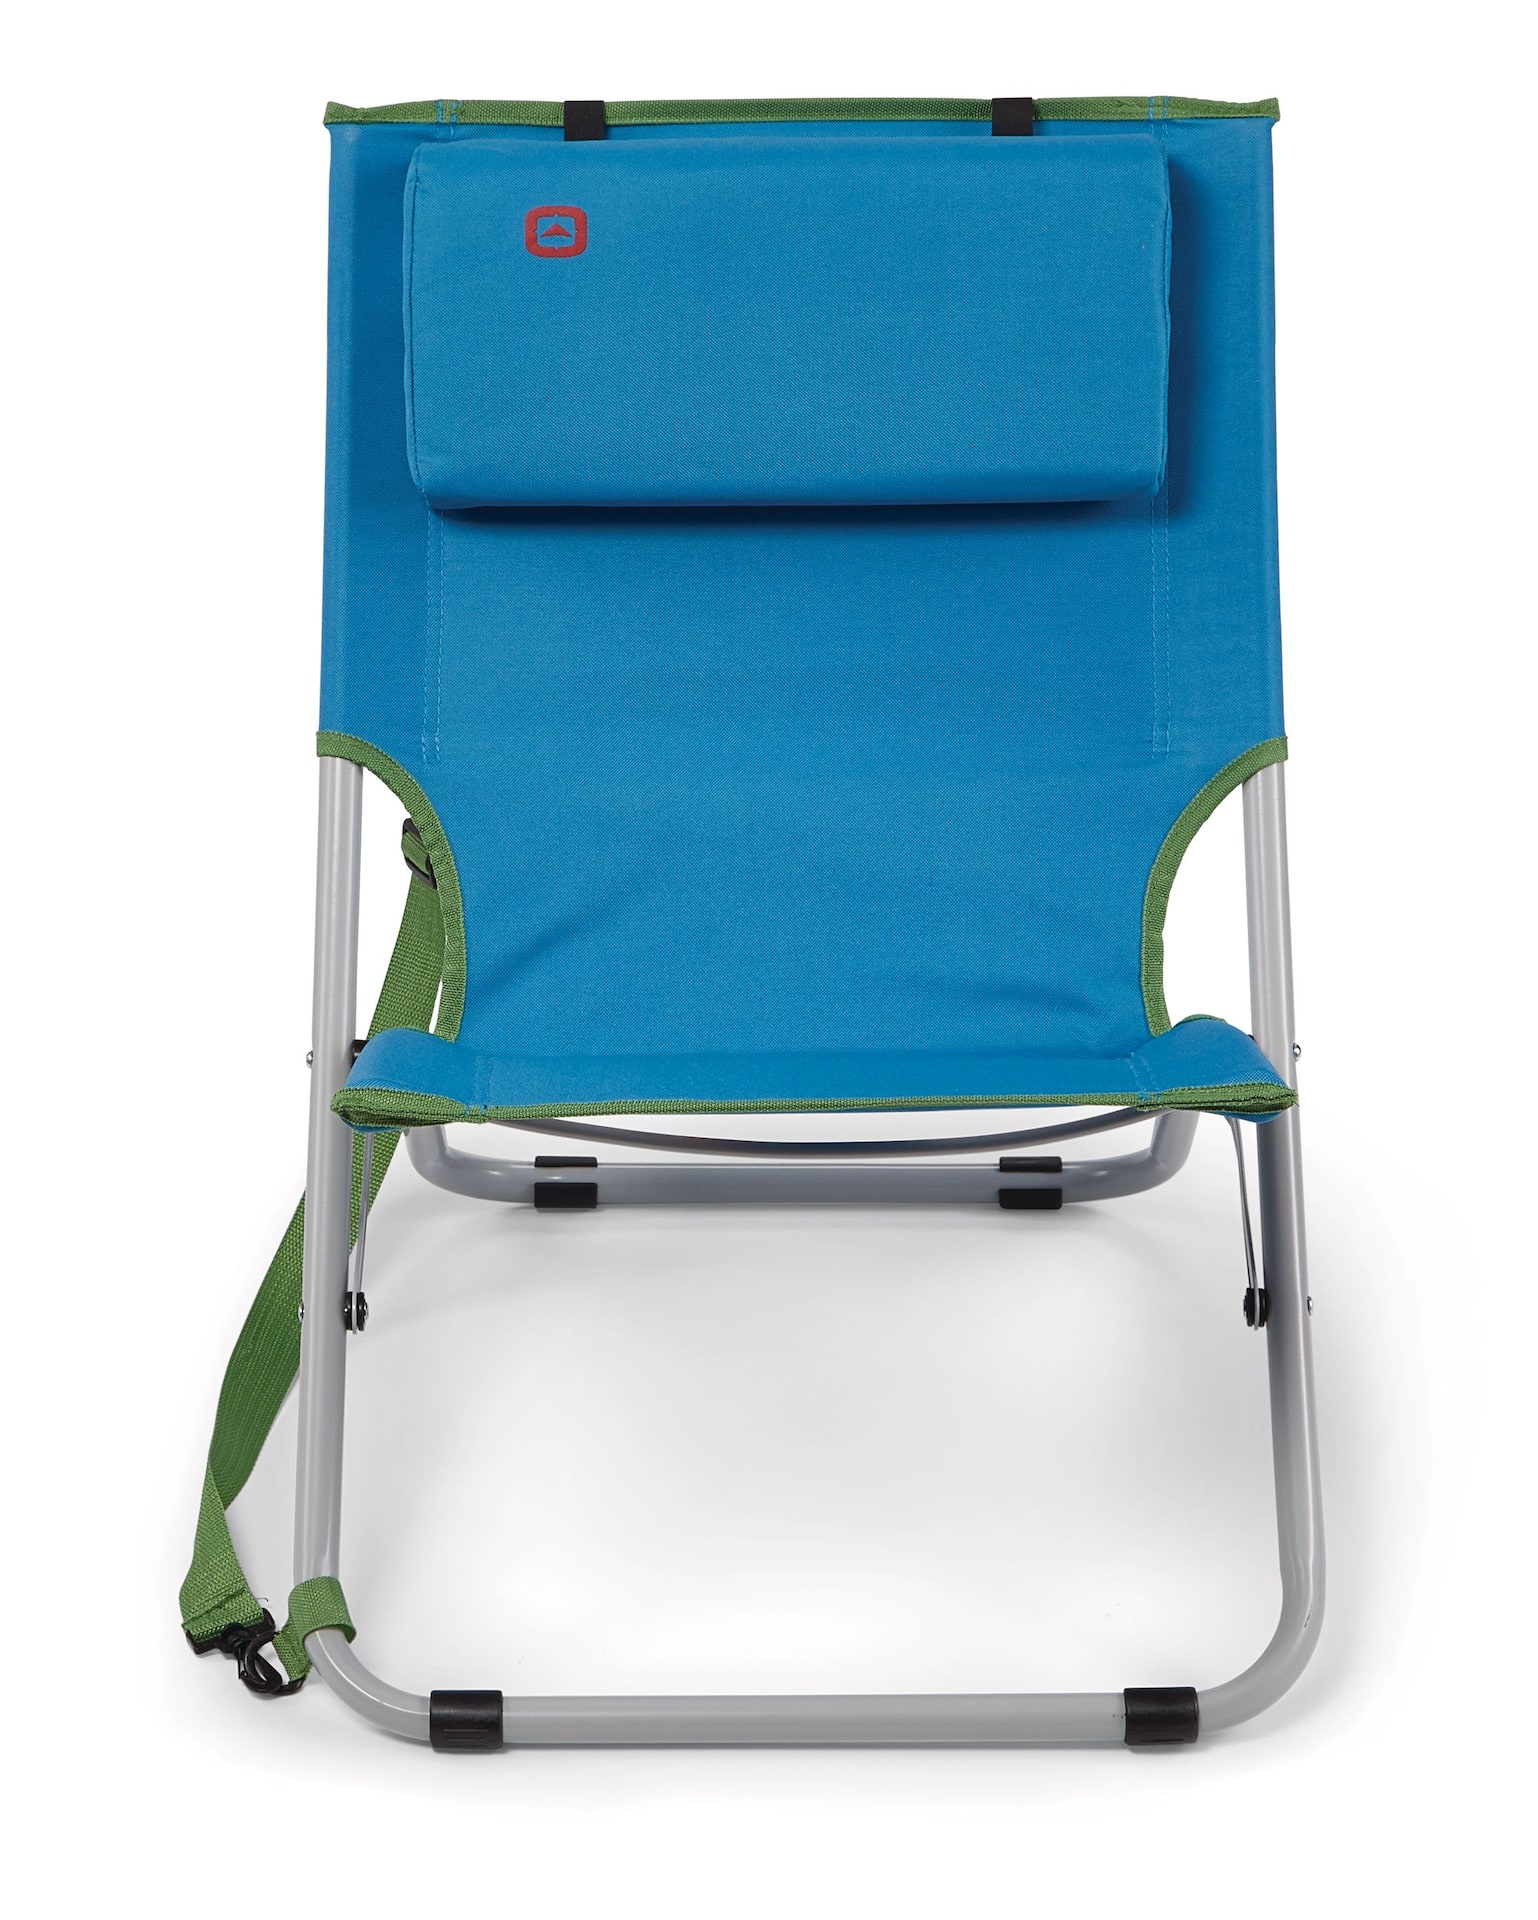 https://media-www.canadiantire.ca/product/playing/camping/camping-furniture/0765476/outbound-malibu-beach-chair-4849388f-cc17-45f9-8661-2a5cc8ab2e2f-jpgrendition.jpg